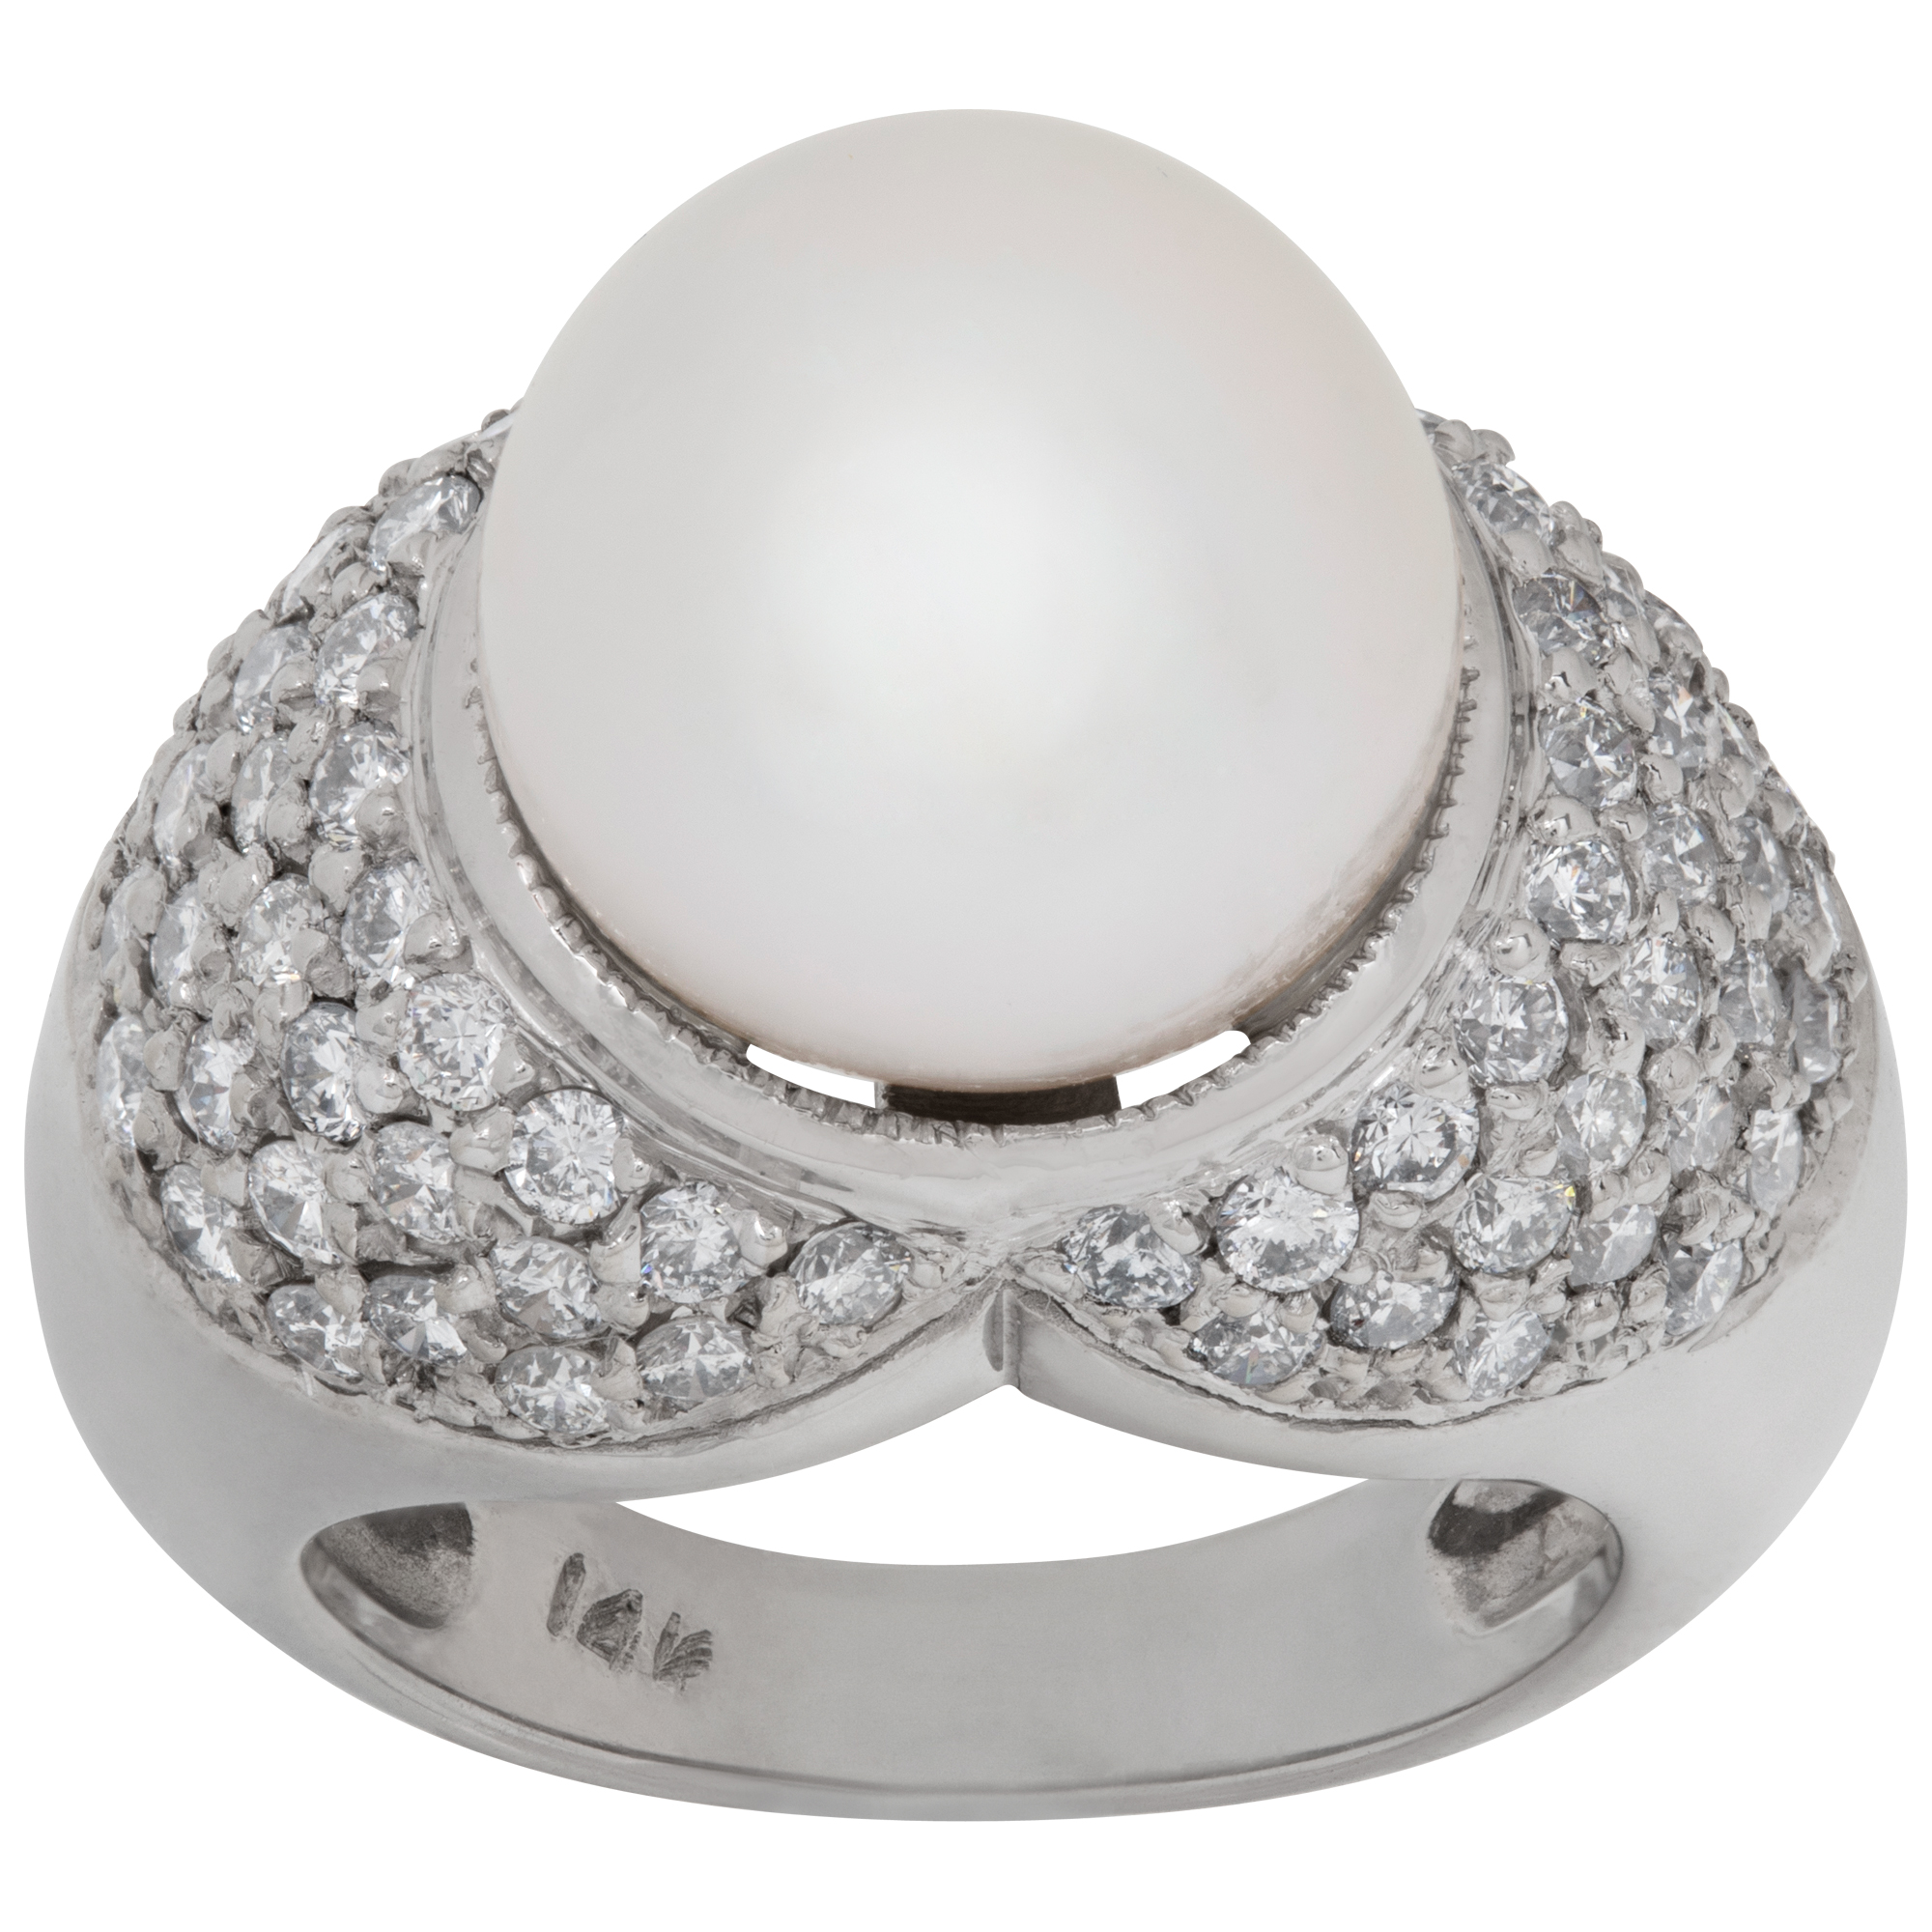 South Sea pearl (12 x 12.5mm) & diamonds ring set in 14k white gold.